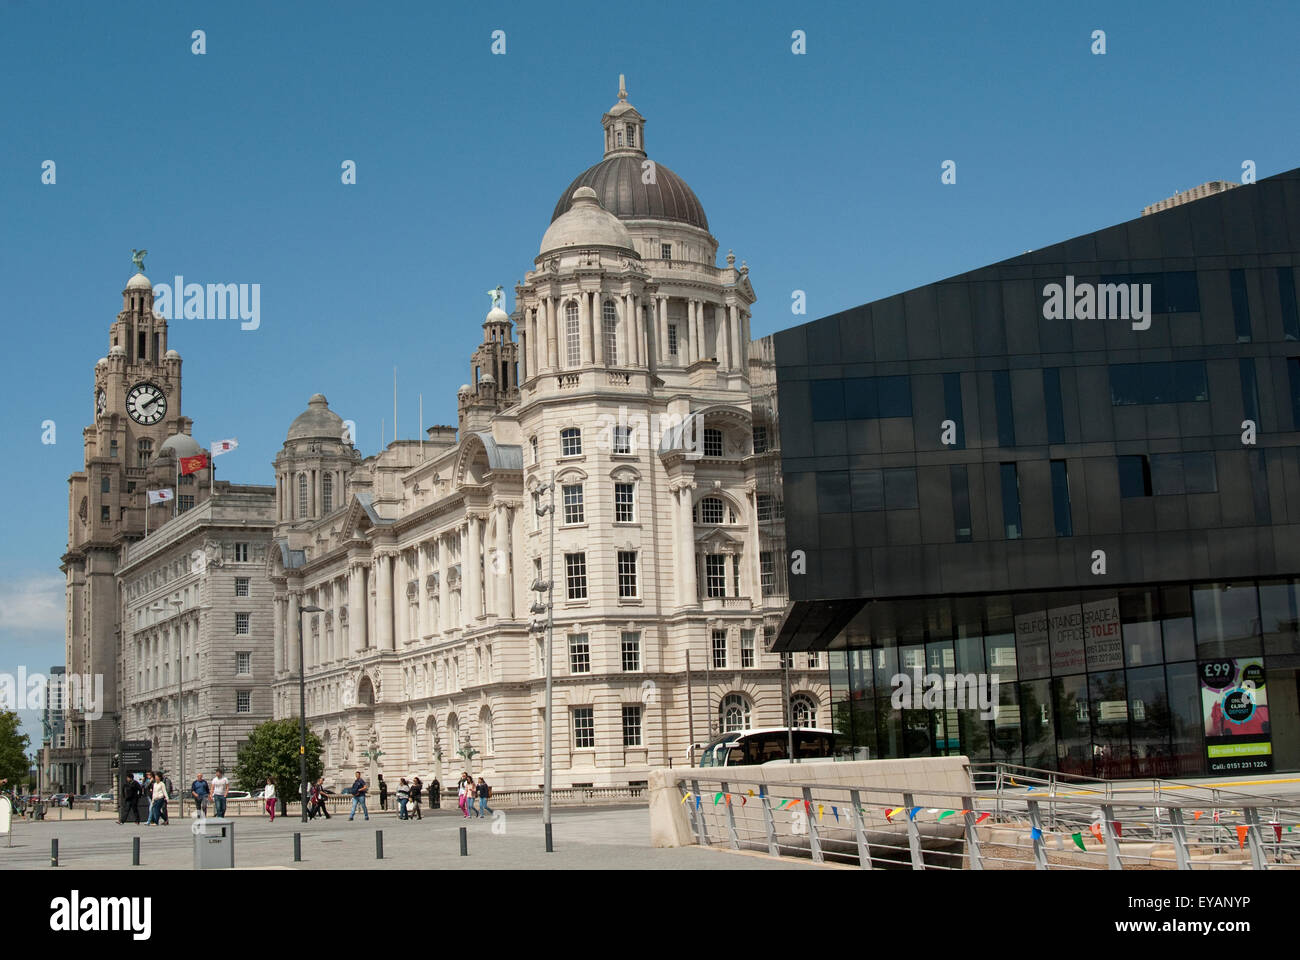 Editorial image taken in Liverpool of the Three Graces buildings on the Pier Head area Stock Photo